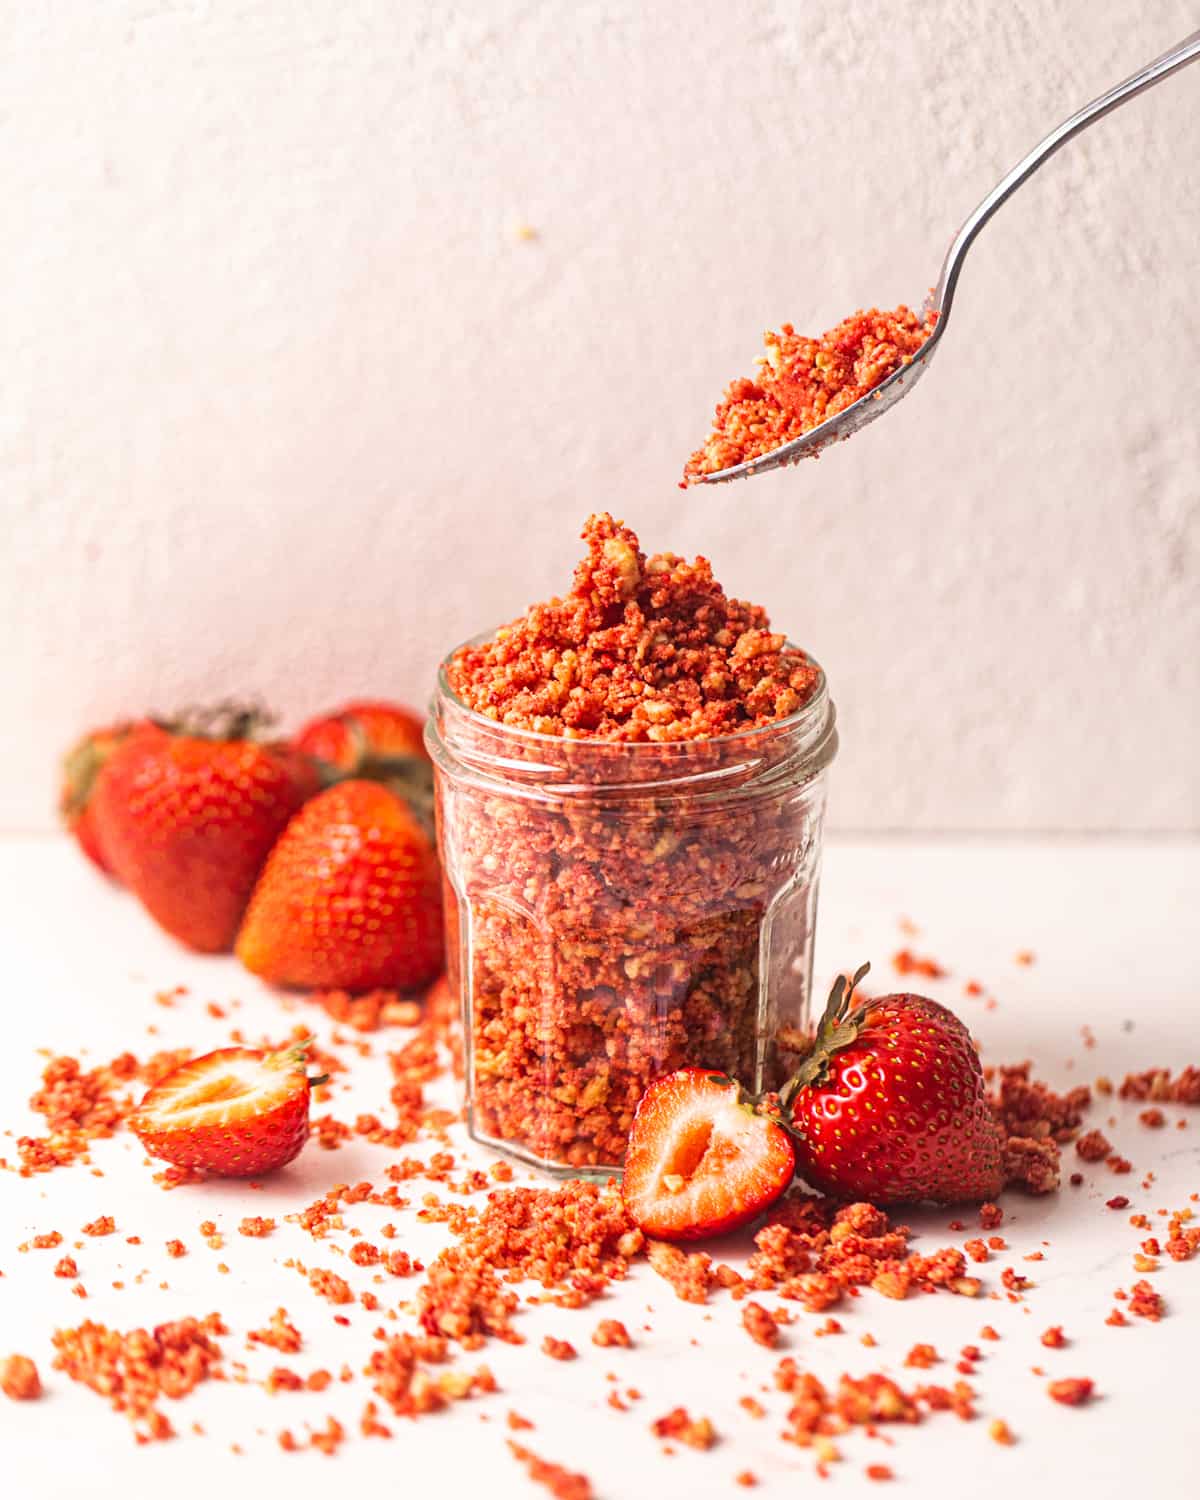 strawberry crunch topping in a jar with a spoon.